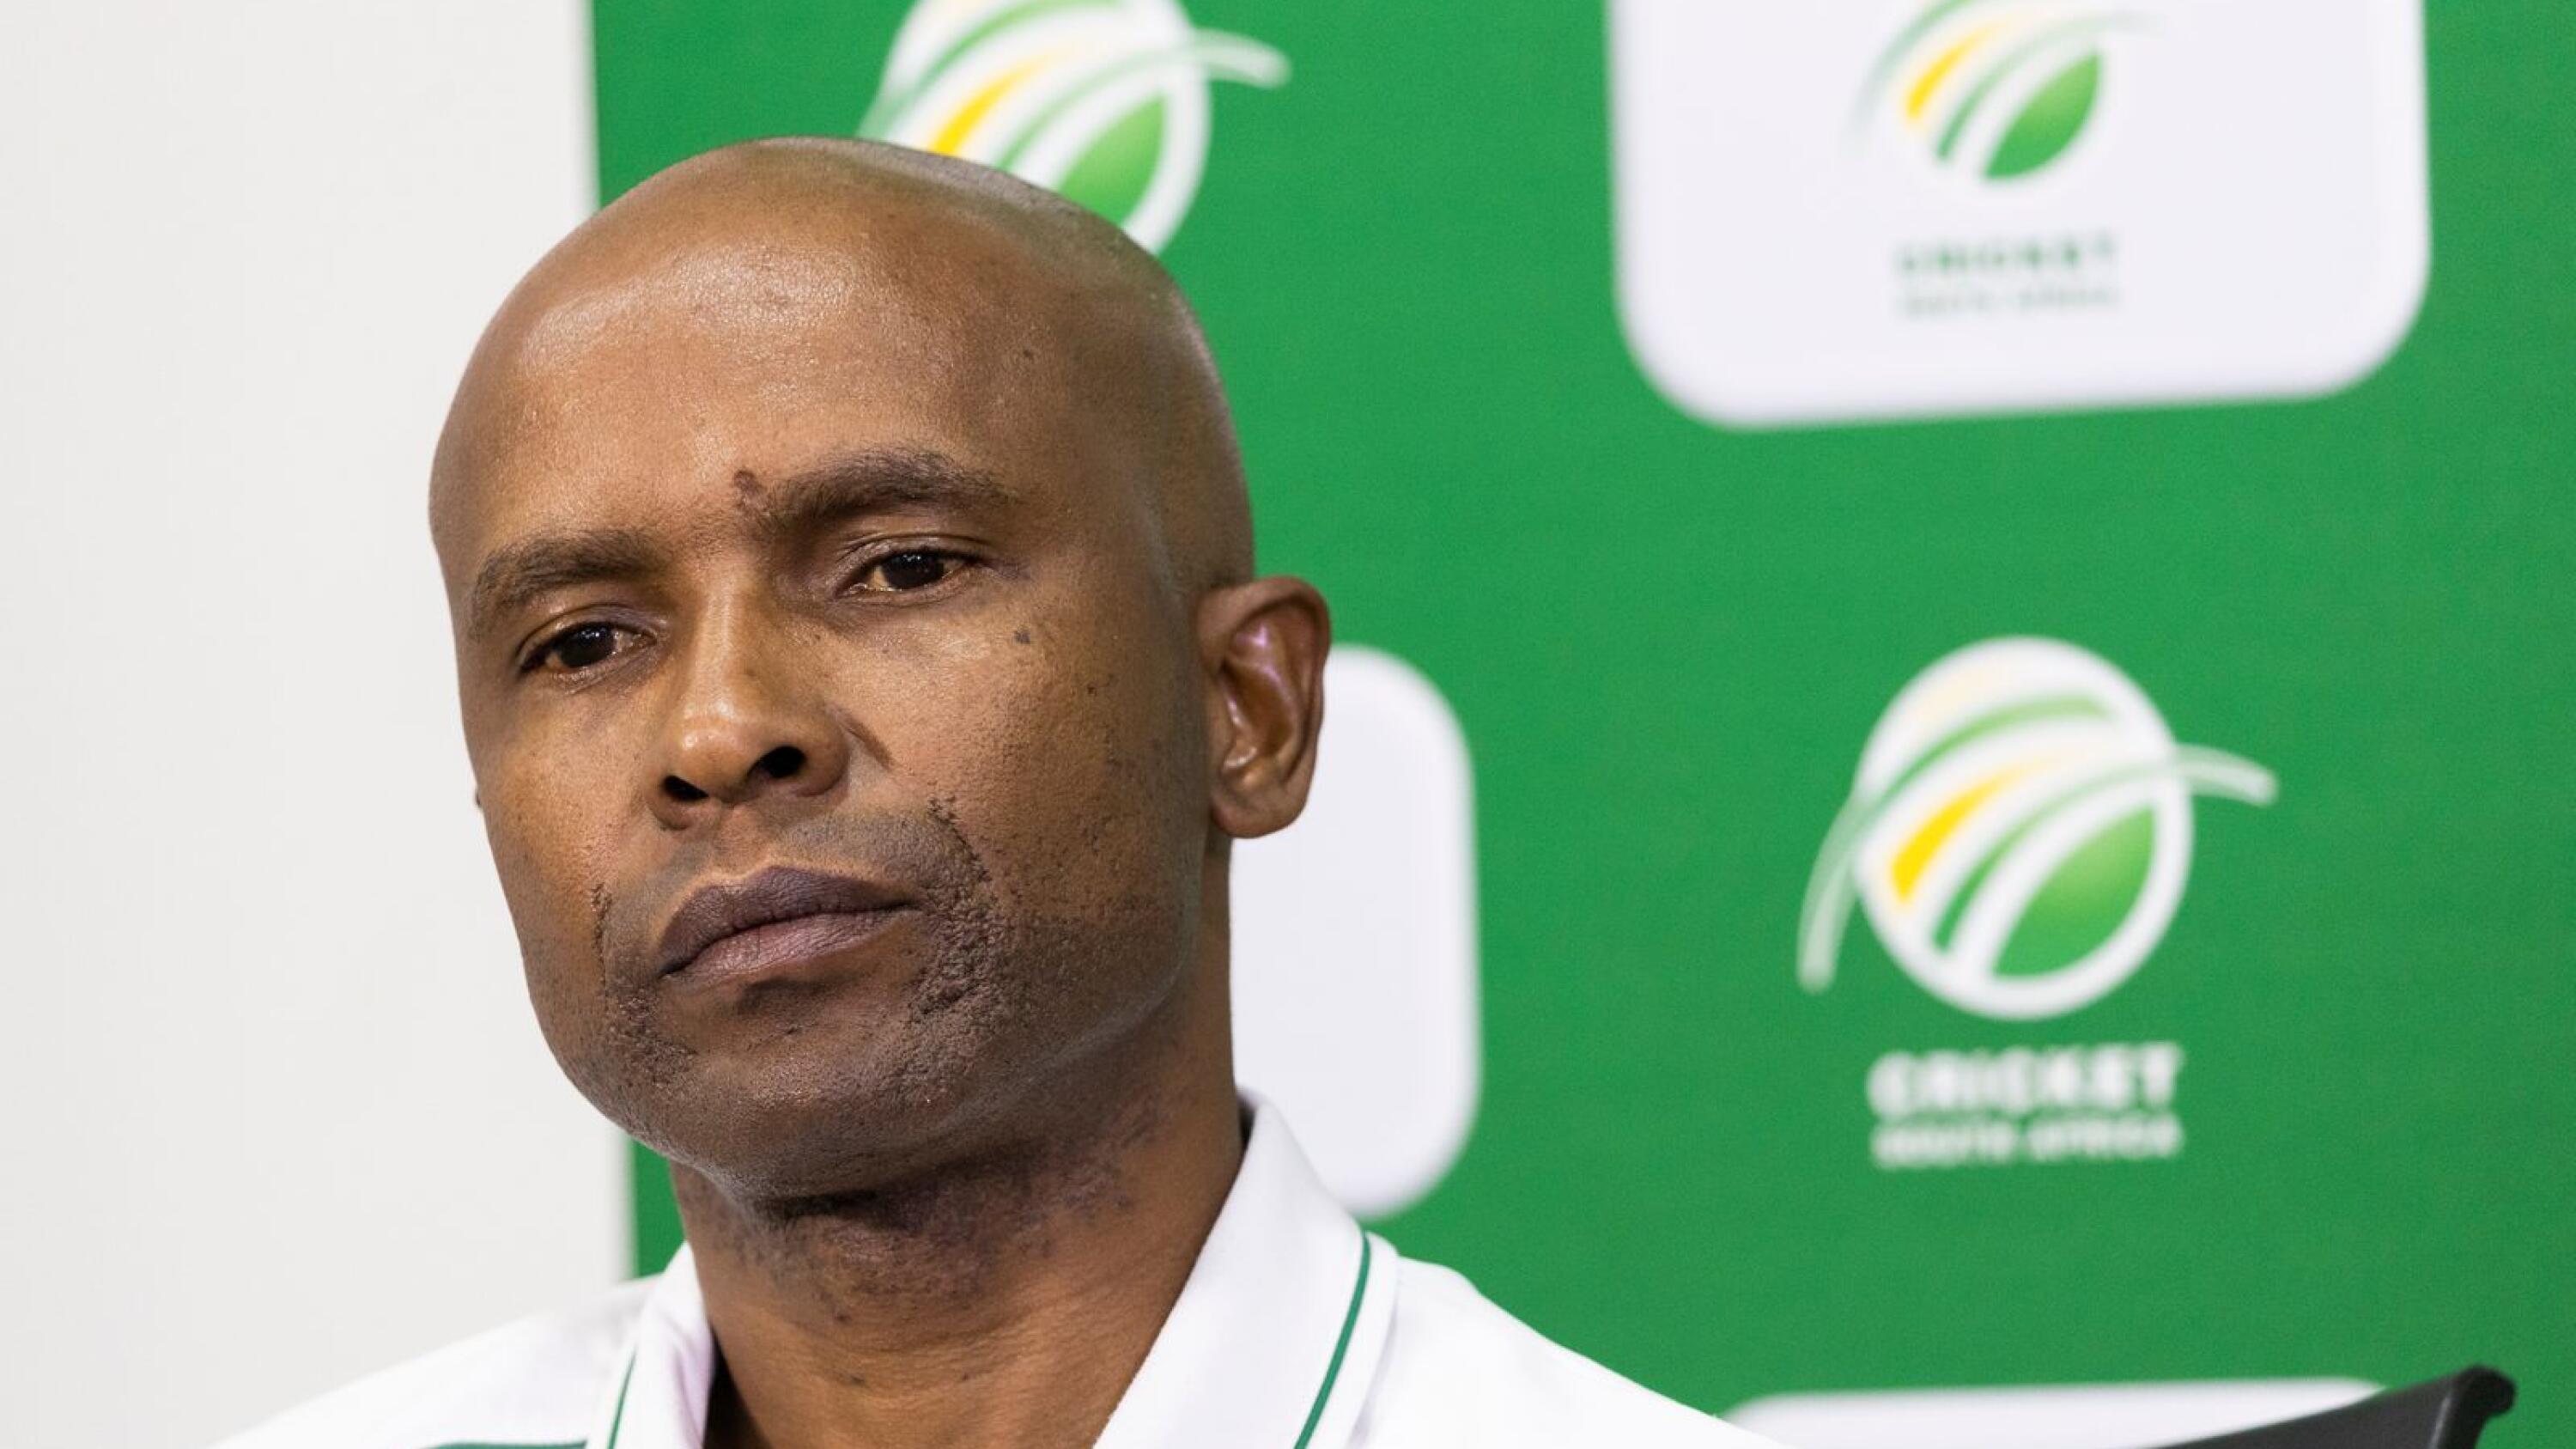 Cricket South Africa (CSA) chief executive Pholetsi Moseki looks on during a press conference.